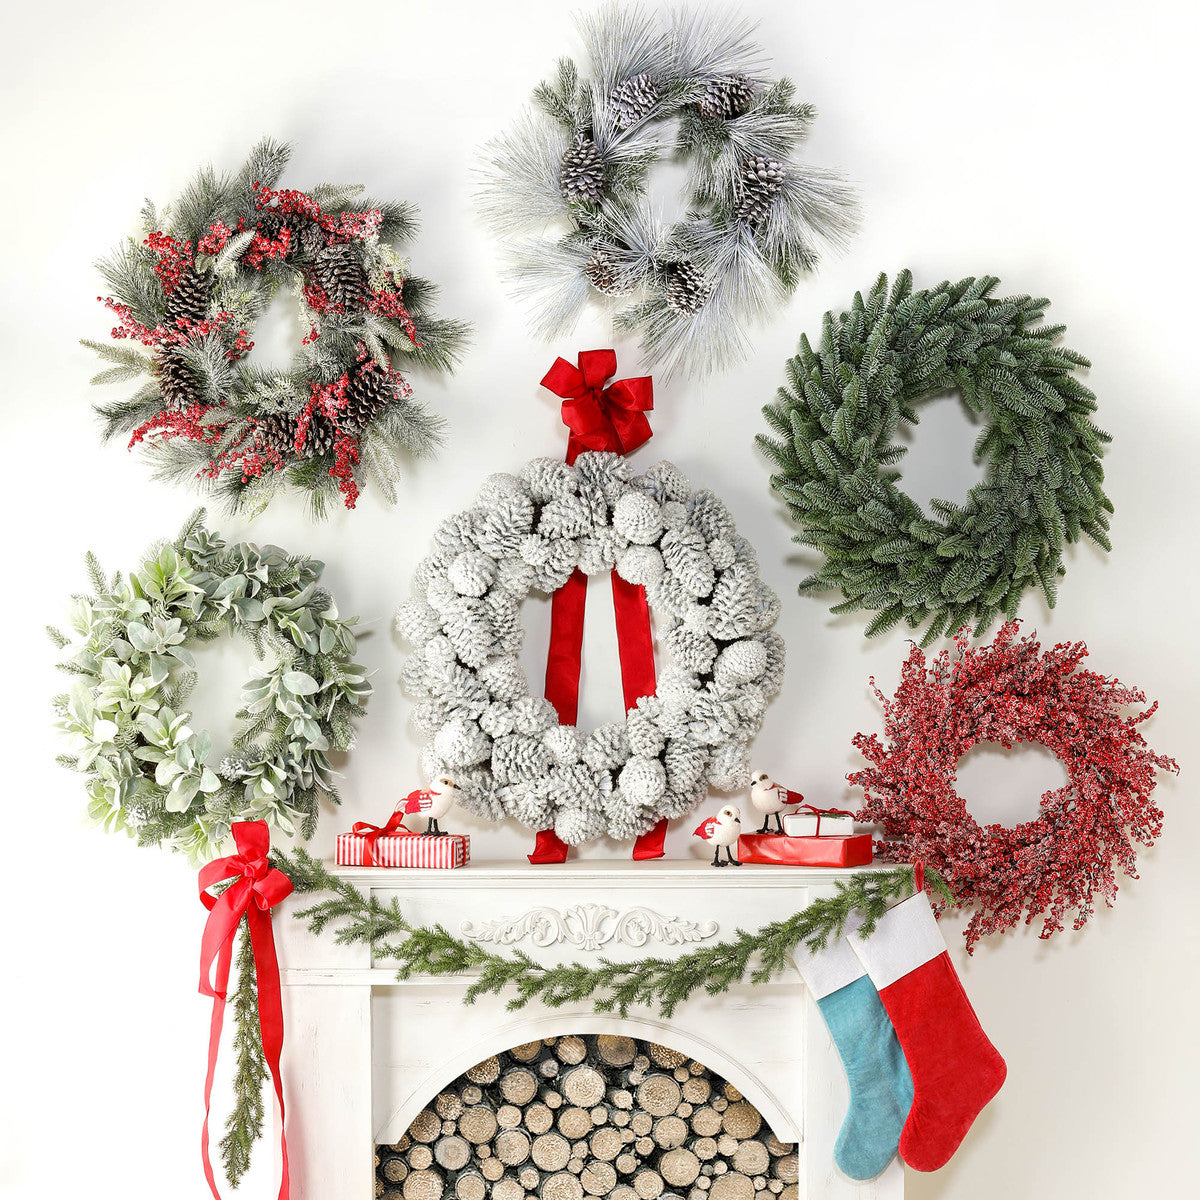 six holiday wreaths above a festive mantel on a white wall